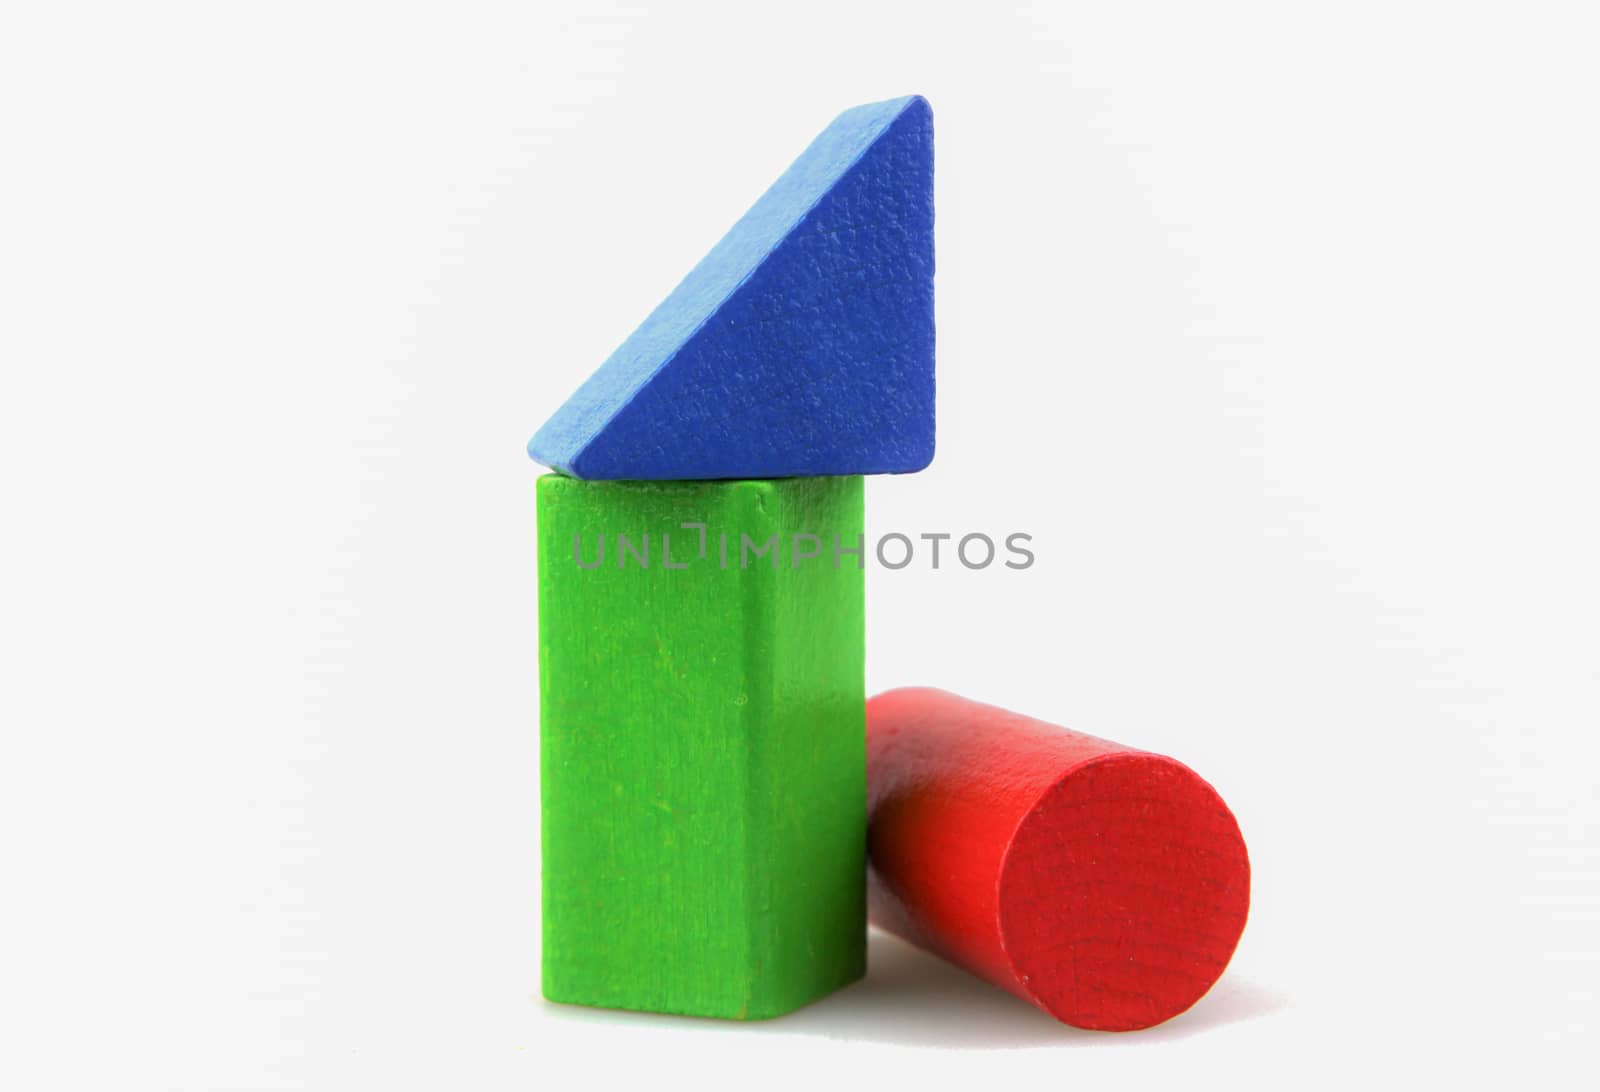 Colorful Wooden Building Blocks Toys Isolated On White